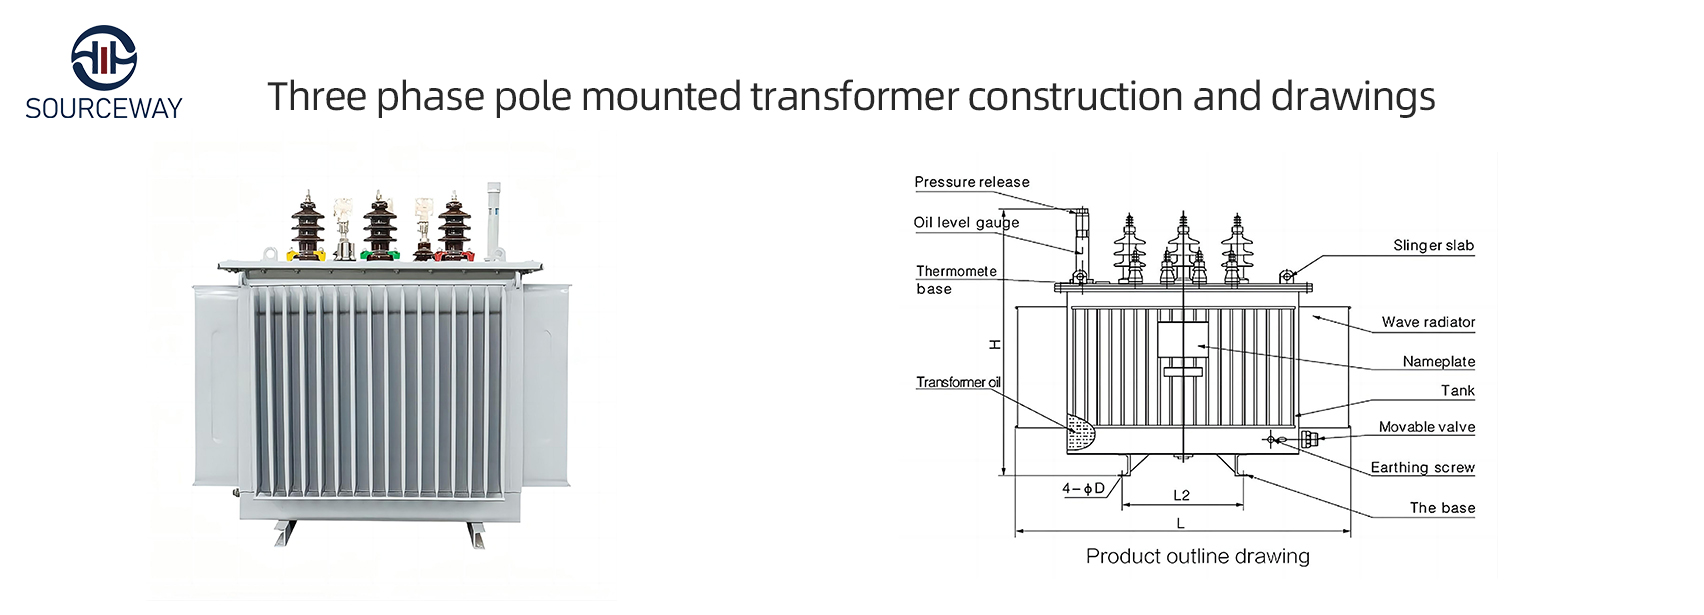 Three phase pole mounted transformer construction and drawings